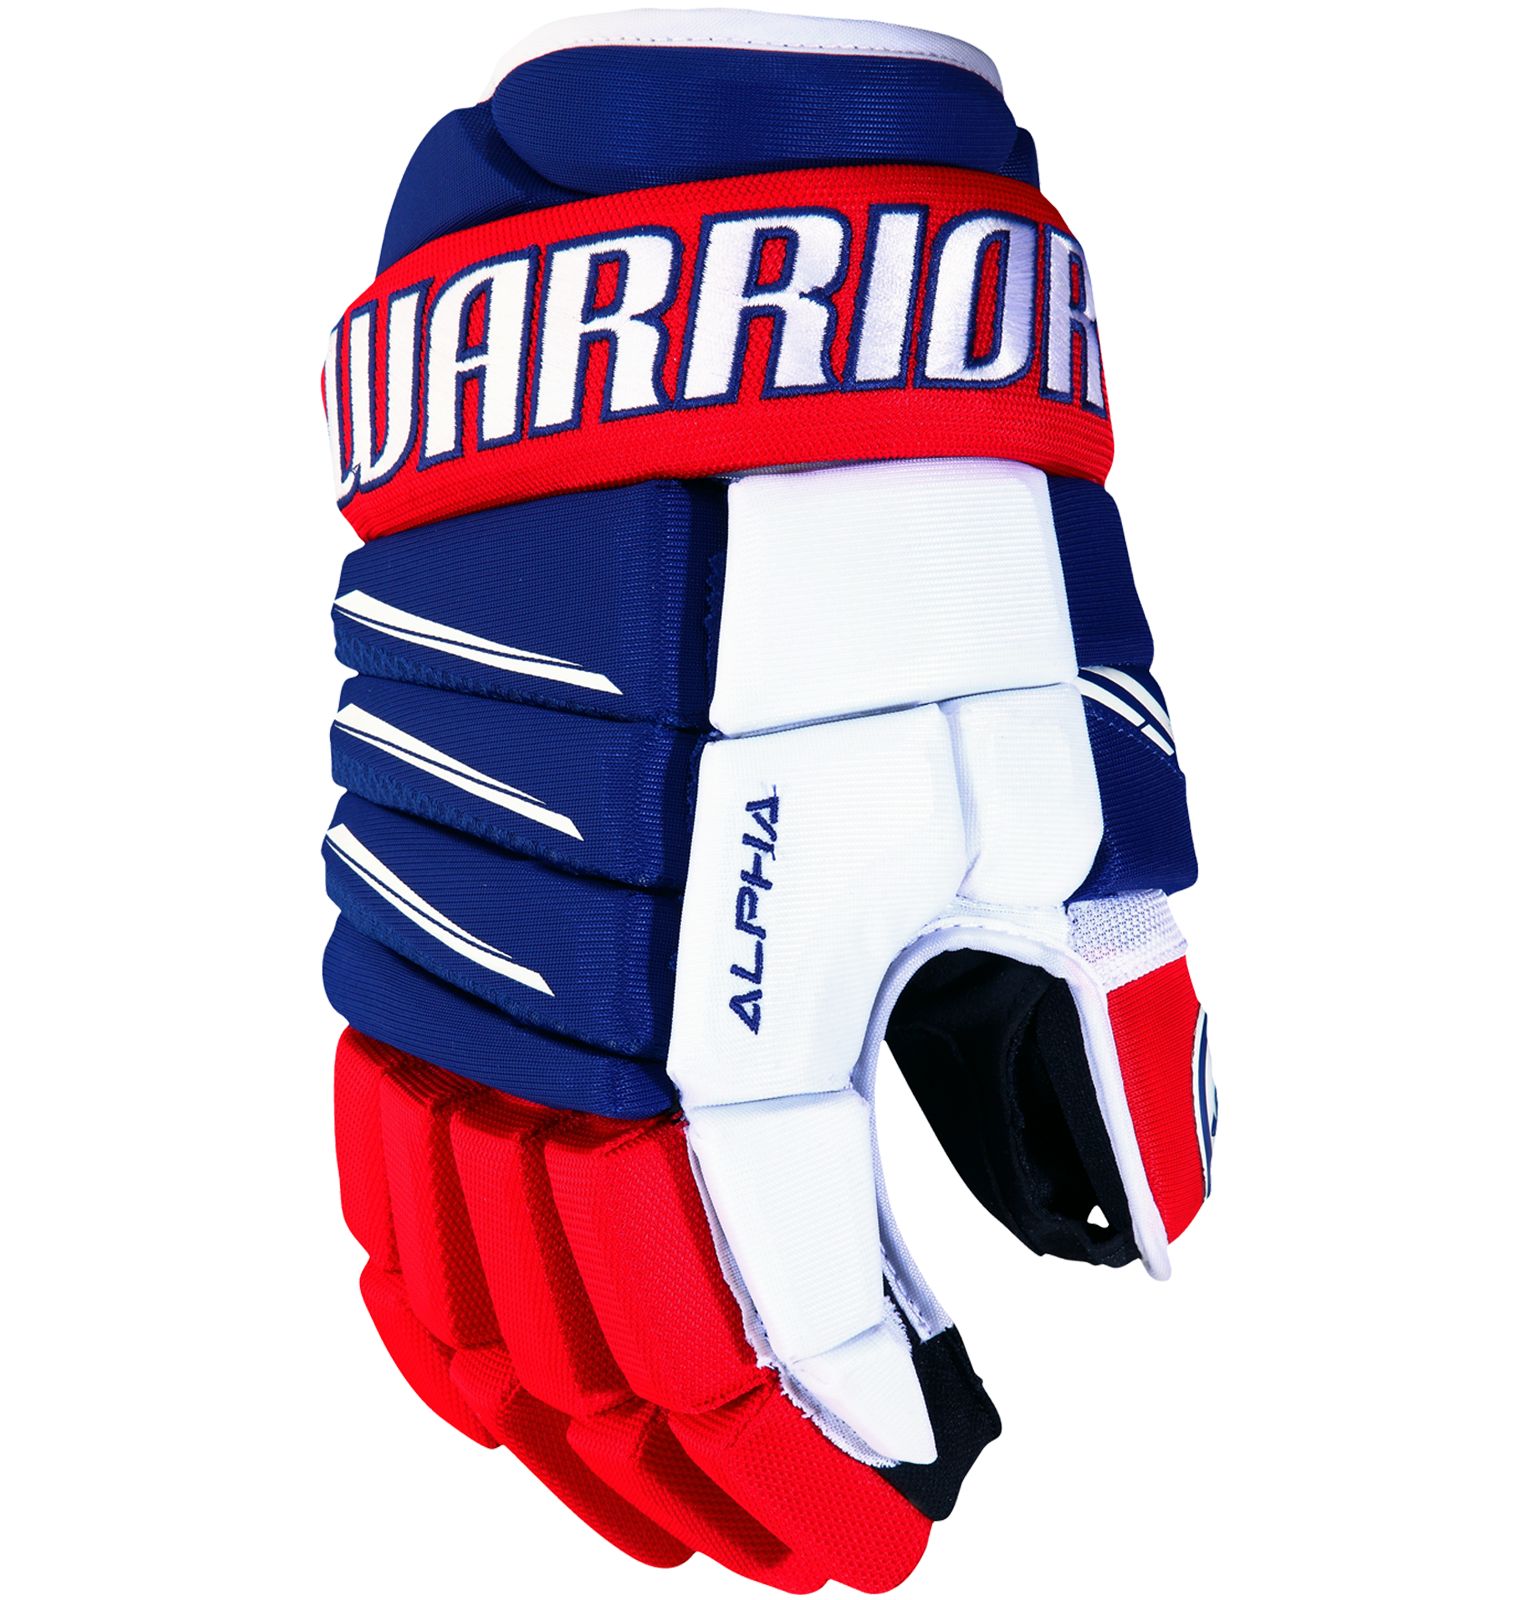 Alpha QX3 JR Glove, Royal Blue with Red & White image number 0